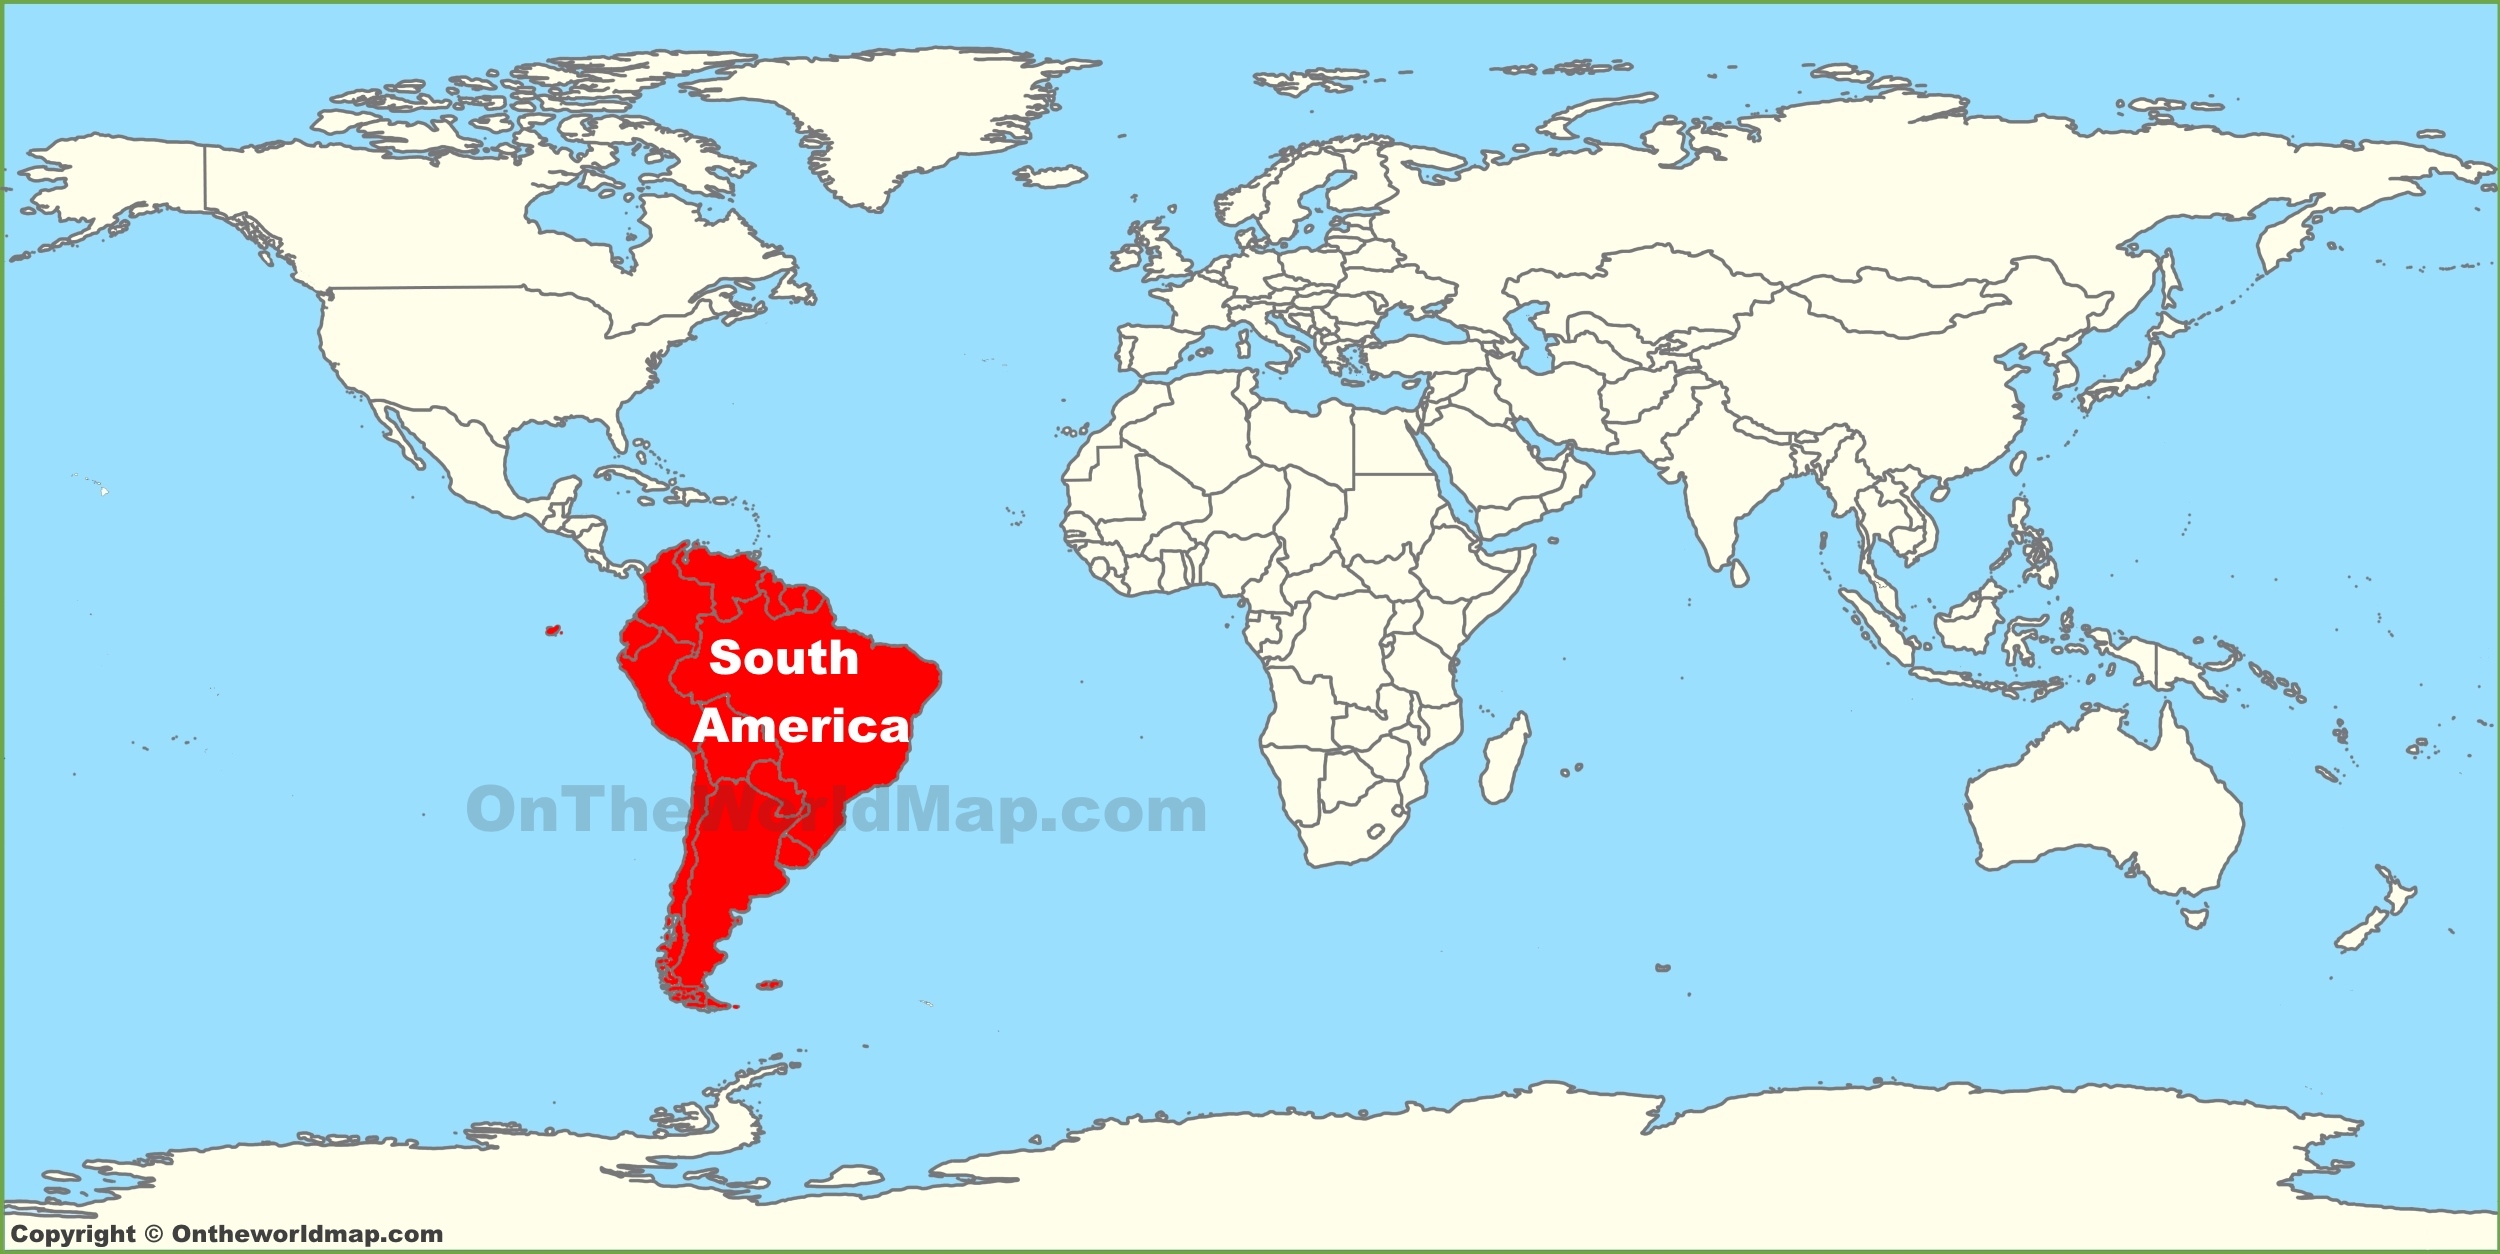 South America Location On The World Map